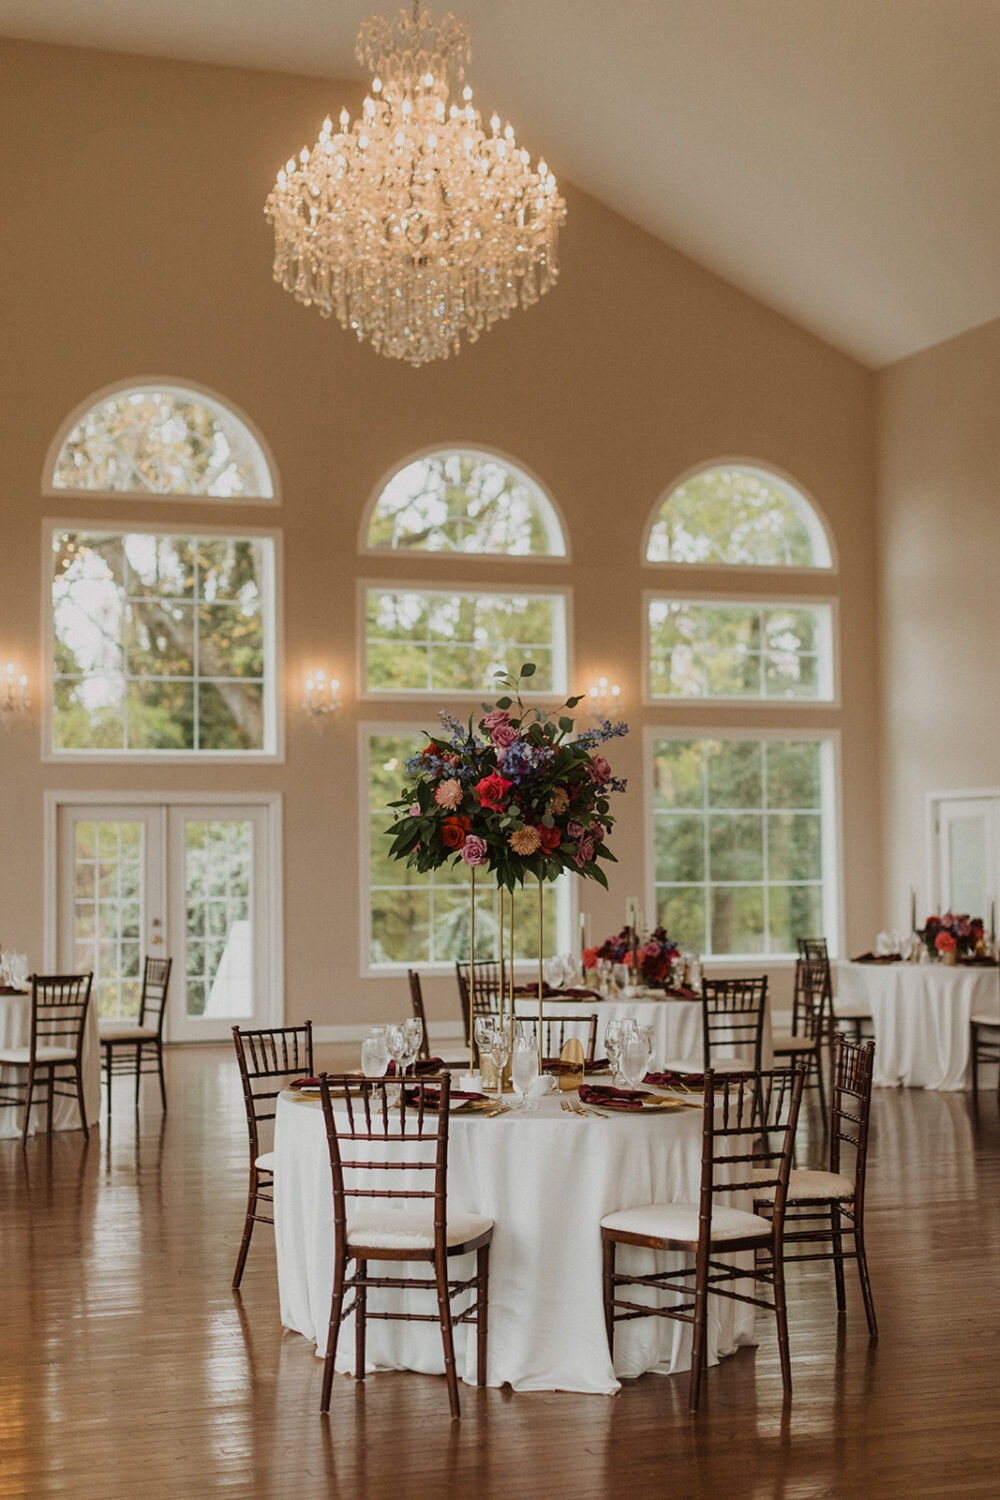 floral decor and chandelier at ballroom wedding reception